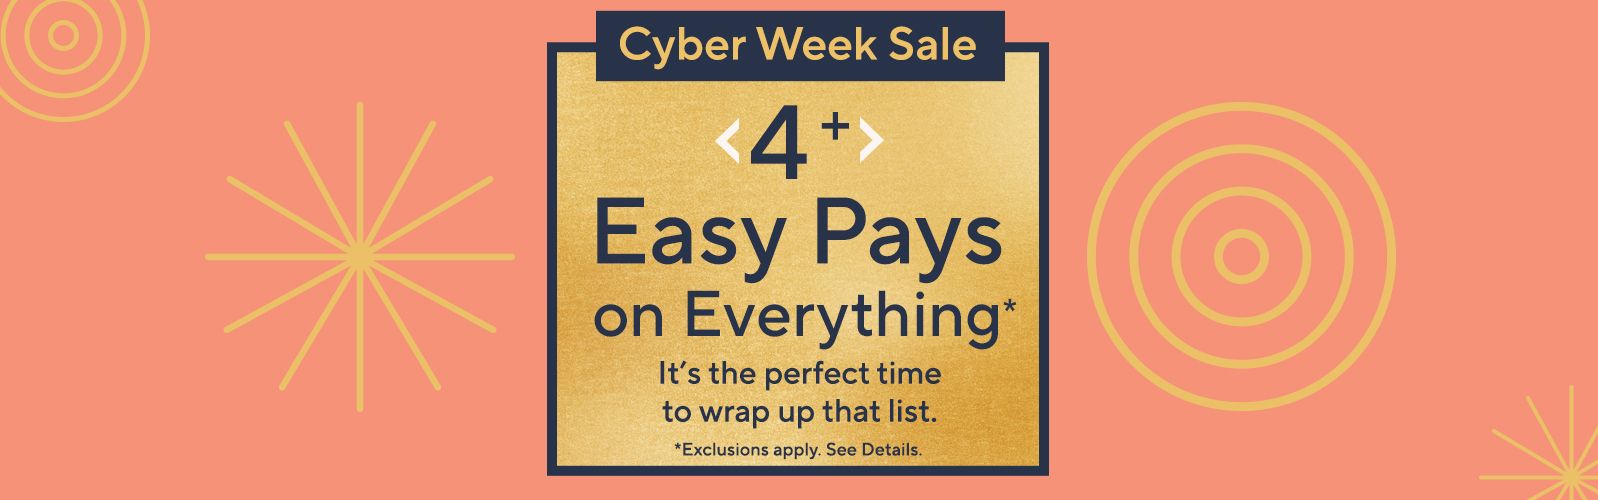 Cyber Week Sale. 4+ Easy Pays on Everything* It’s the perfect time to wrap up that list. Cyber Week Sale. 4+ Easy Pays on Everything* It’s the perfect time to wrap up that list. *Exclusions apply. See details.